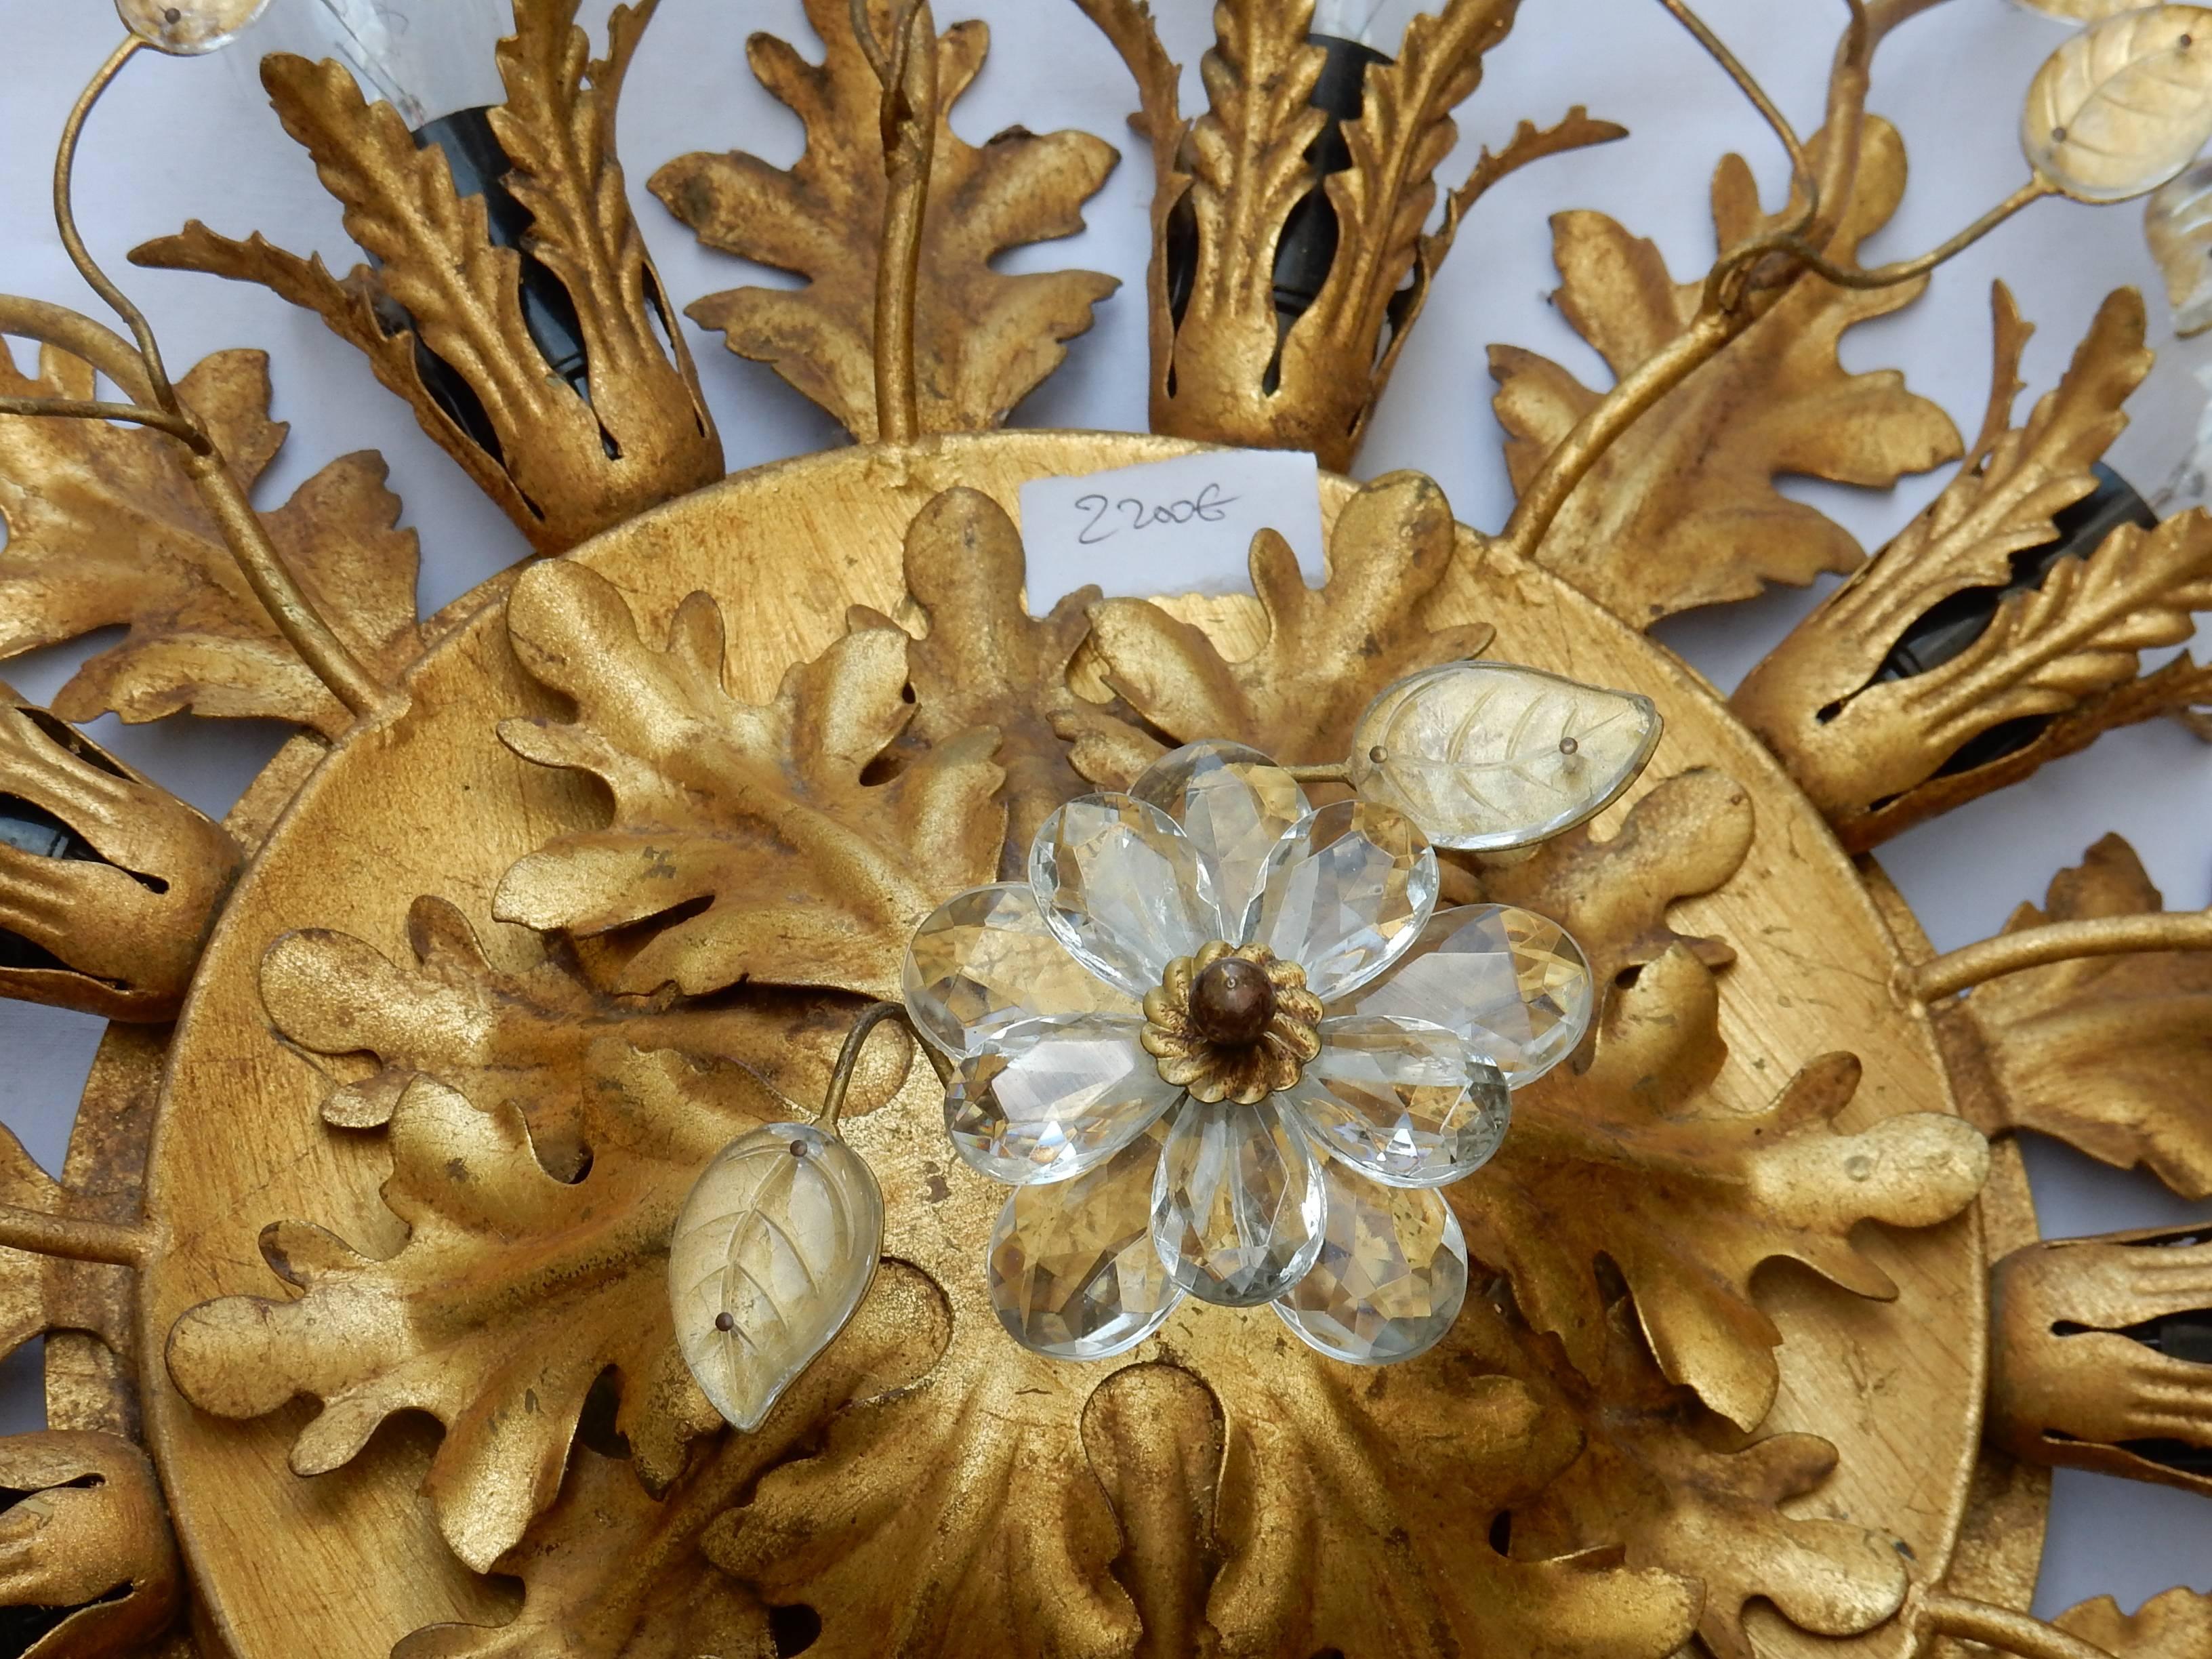 Mid-20th Century 1950-1970 Ceiling Light Has Floral Decoration in the Style of Maison Baguès